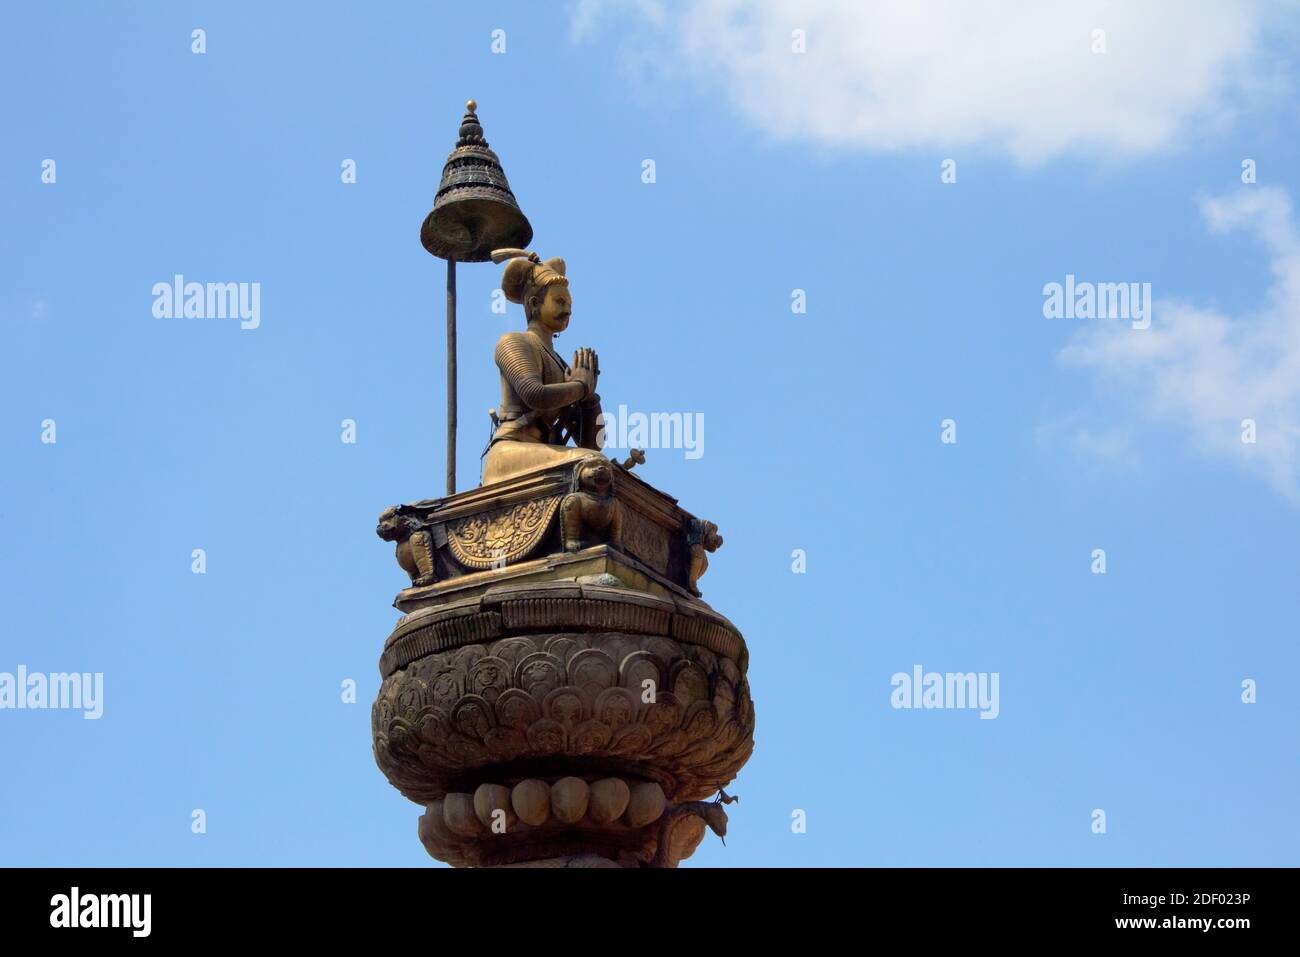 Statue of King Bhupatindra Malla perched on the top of a stone monolith, Bhaktapur Durbar Square, UNESCO World Heritage site, Bhaktapur, Nepal Stock Photo